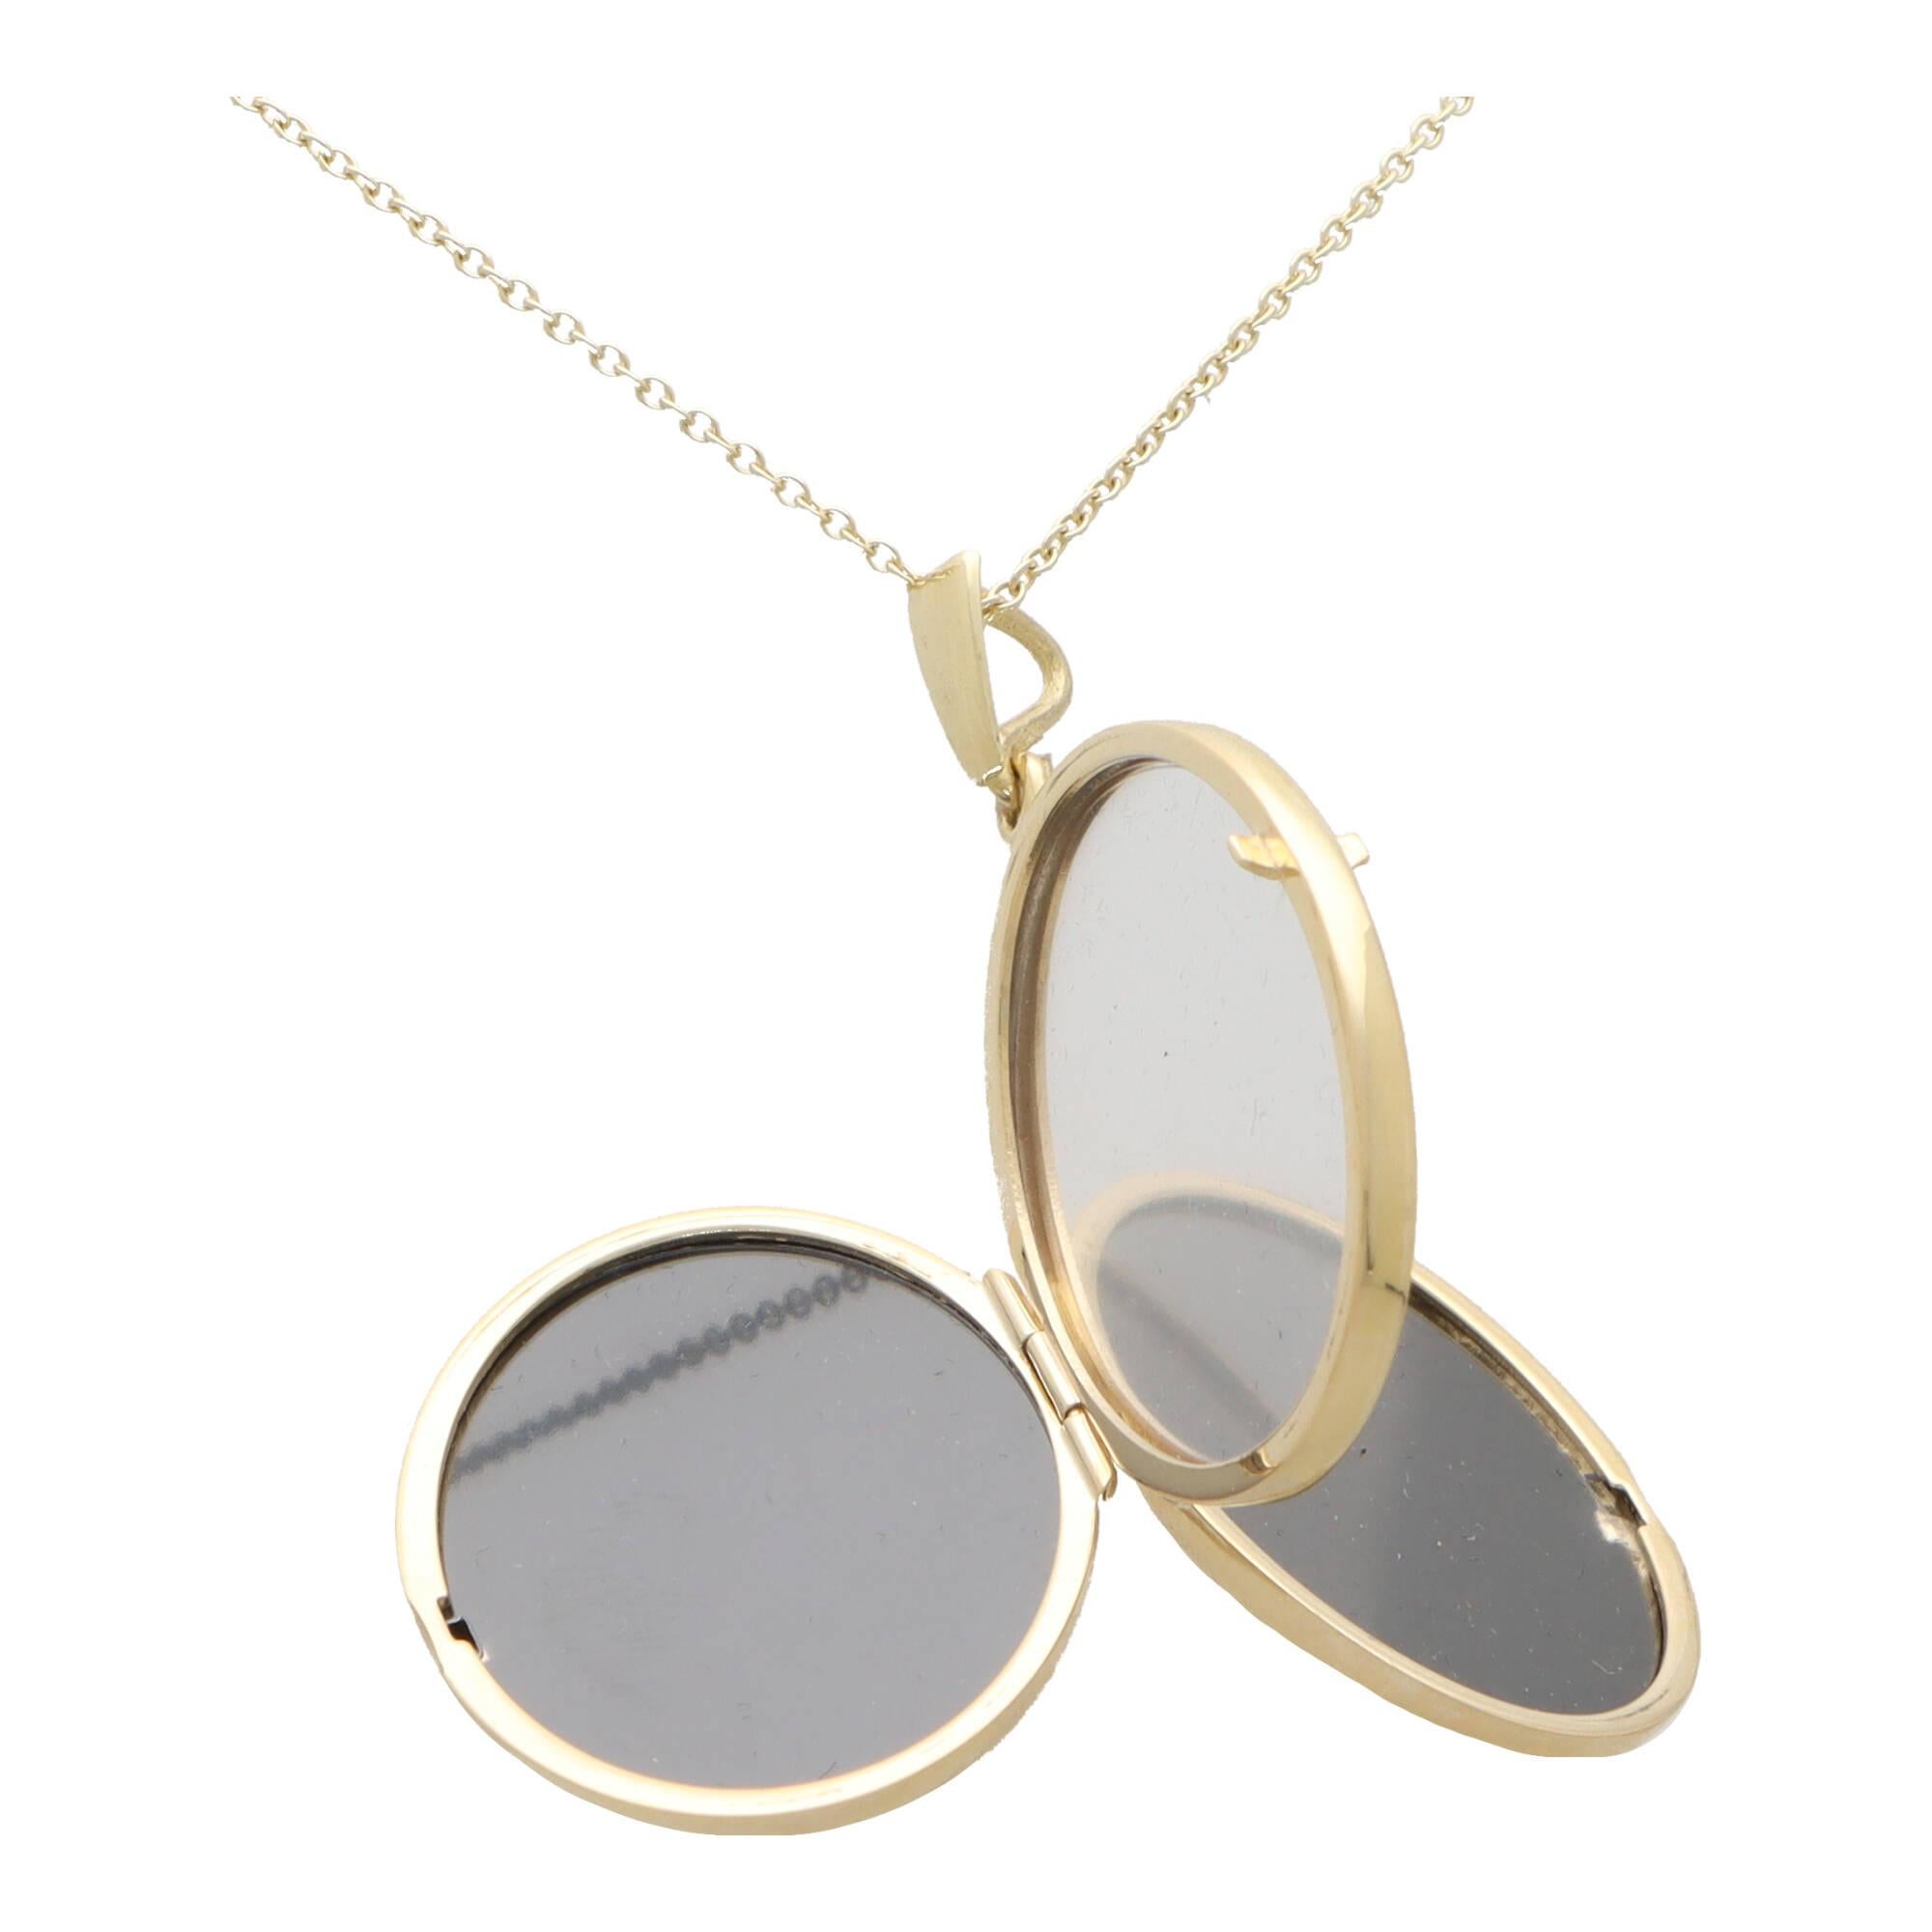 A stylish locket pendant set in 9k yellow gold.

The piece is composed of large oval shaped locket which has been left polished yellow gold so that the owner can engrave to their choosing. The locket opens from each side with the central panel being